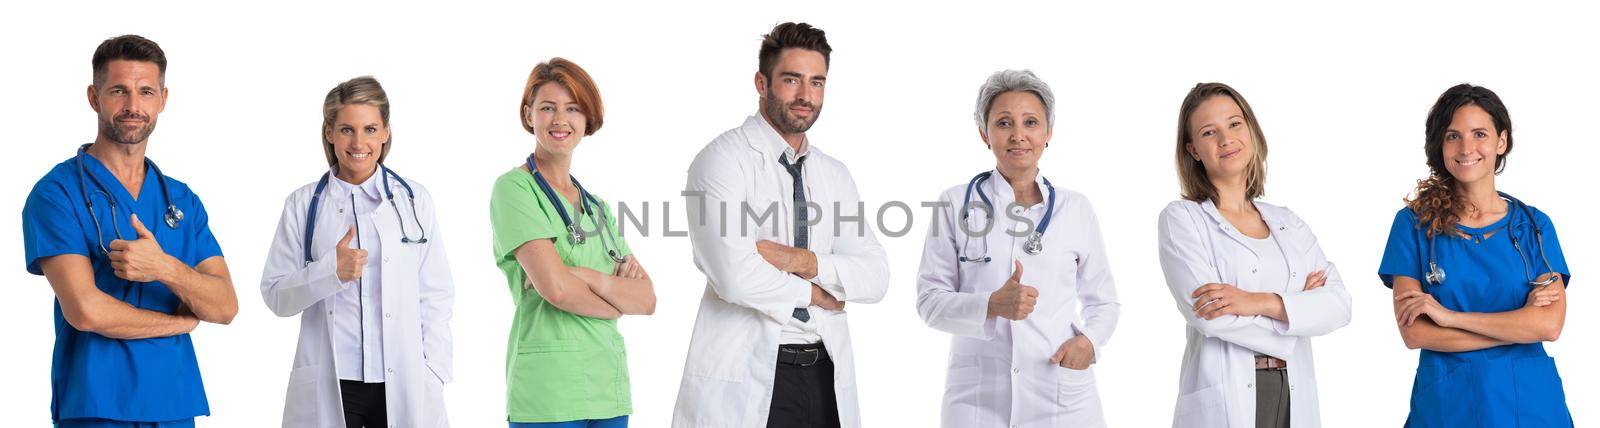 Collection of portraits of medical doctors and nurses. Design element, studio isolated on white background